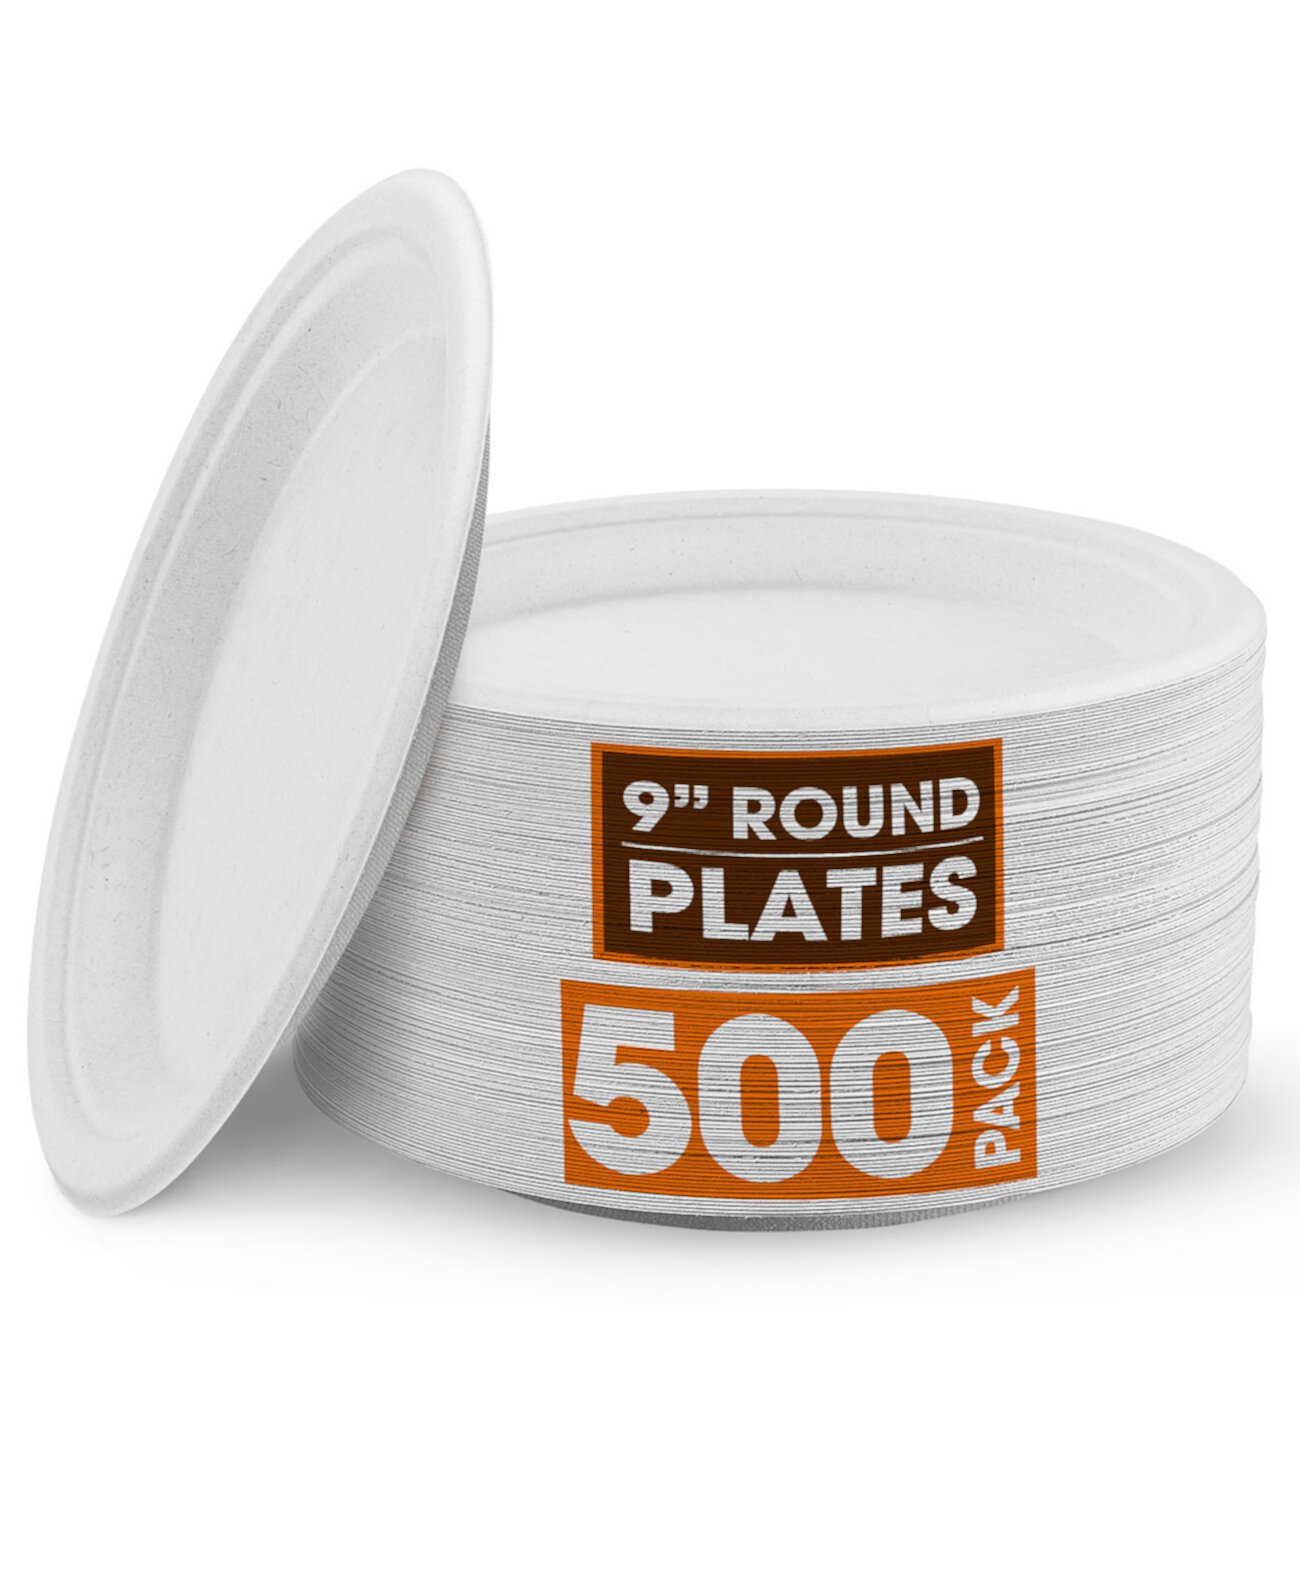 9 Inch Paper Plates, 500 Pack Cheer Collection